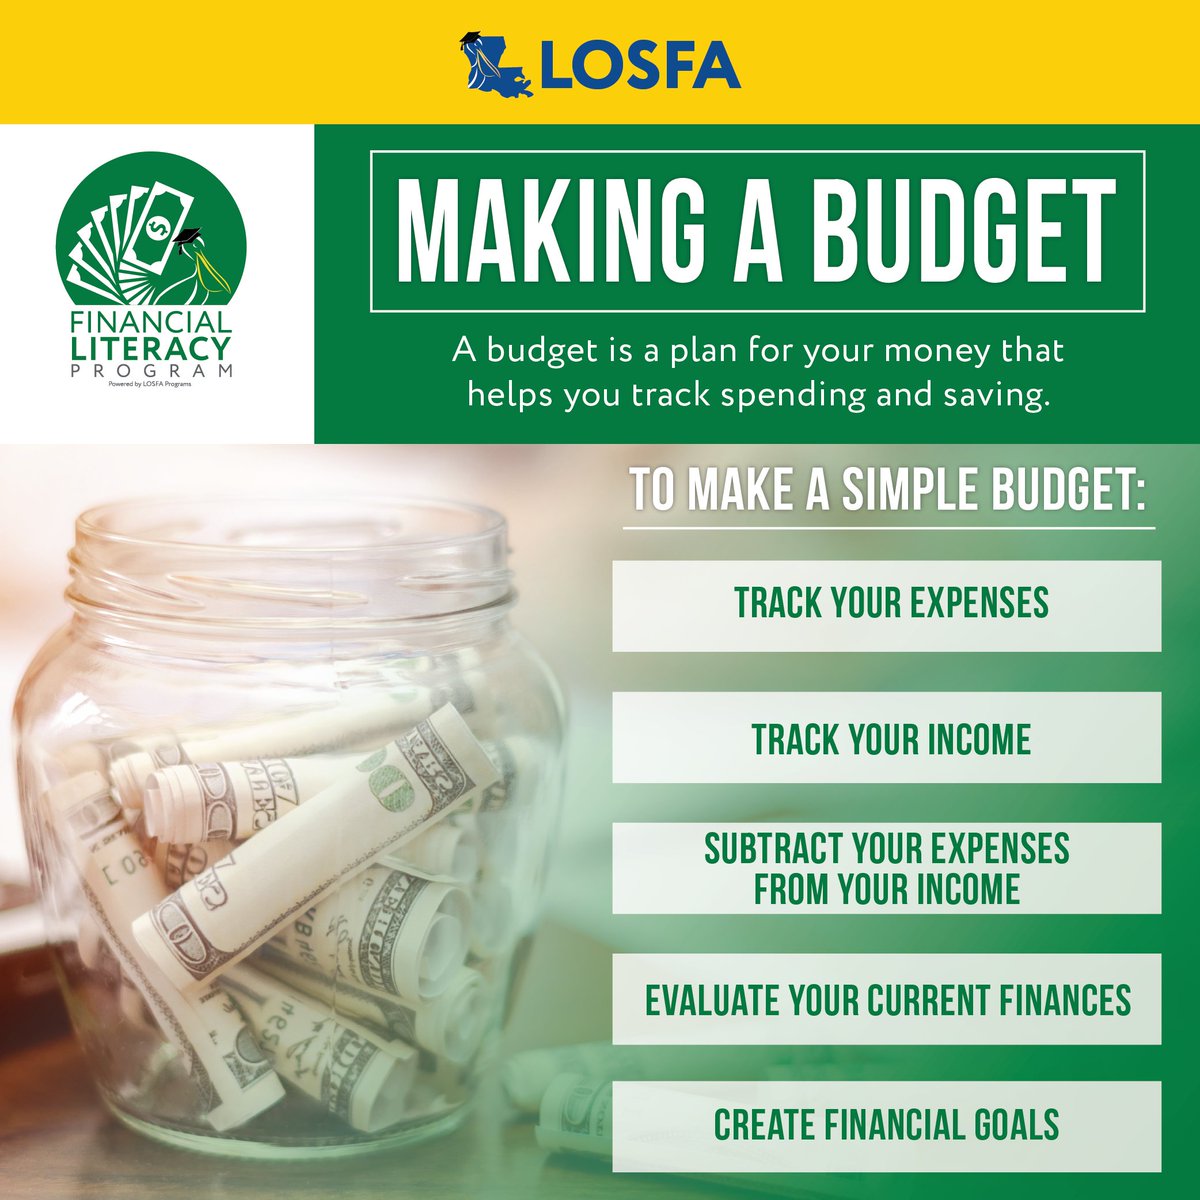 Creating a budget can feel overwhelming, but it is a significant first step in determining the current state of your money. During #FinancialLiteracyMonth, try keeping a spending log this month and see where your money goes.